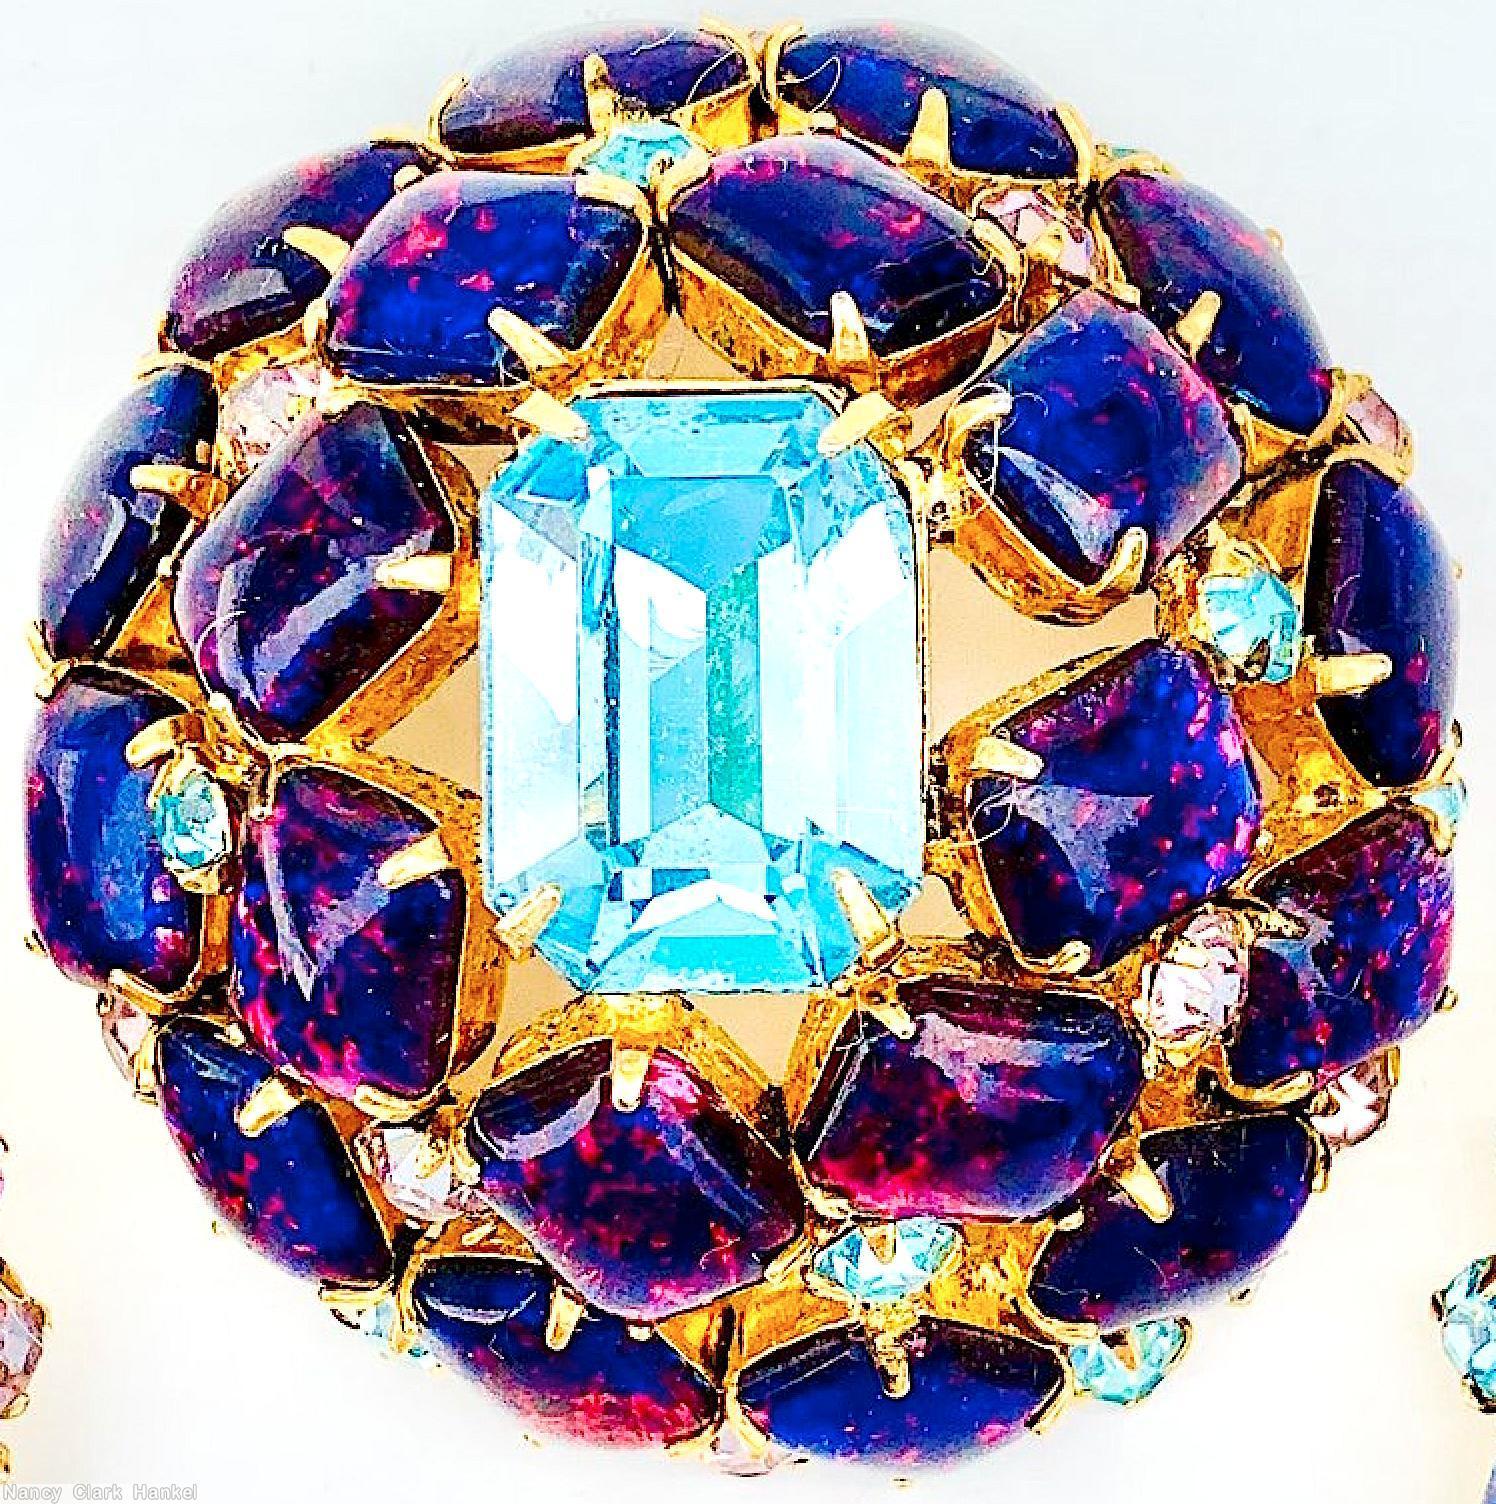 Schreiner high domed oval 20 emeçrald cut stone pin large emerald cut center 8 surrounding stone 12 second round stone small chaton ice blue pink fluss lapis goldtone jewelry